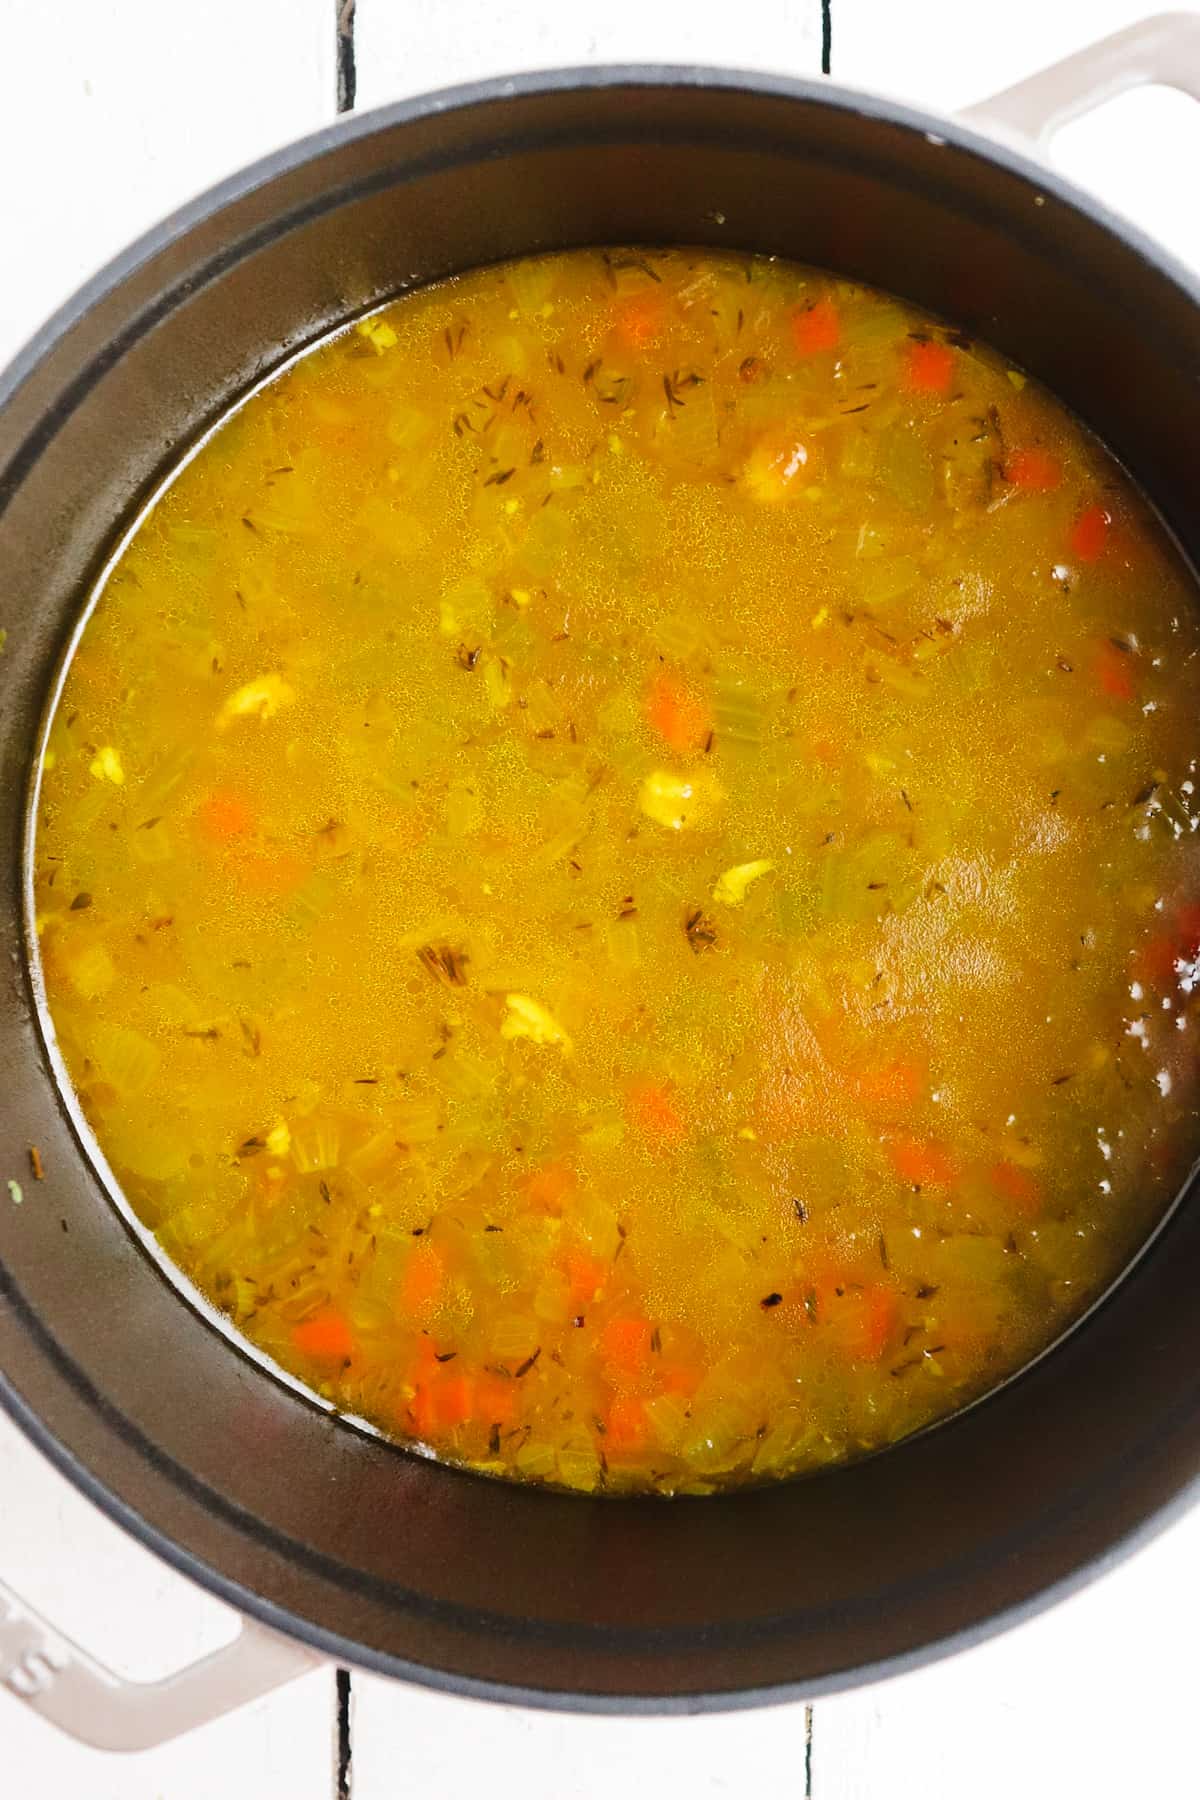 chicken broth added to turmeric and mirepoix in soup pot.